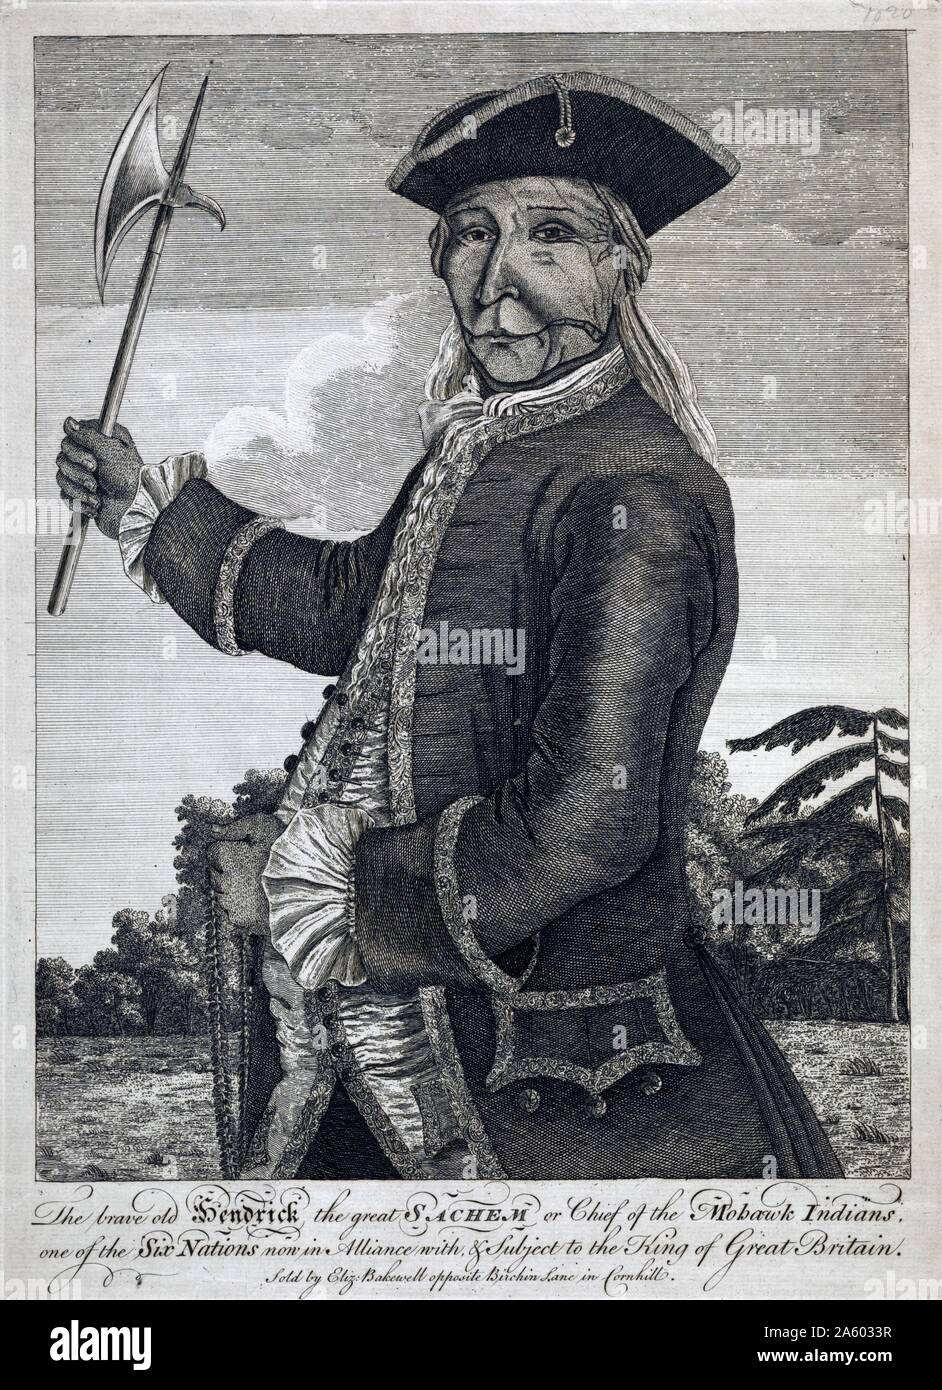 Print of Hendrick, Tiyanoka, also spelled Theyanoguin or Tee Yee Neen Ho Ga Row, the great Mohawk sachem, half-length portrait, facing left, wearing European style military uniform and holding hatchet in his right hand and a wampum belt in his left. 'Hendrick' was one of four Mohawk Indians who visited England in 1710 and again in 1740. On his second visit he received elaborate court clothing trimmed with gold lace. This print may be based on a painting made from that visit. Stock Photo